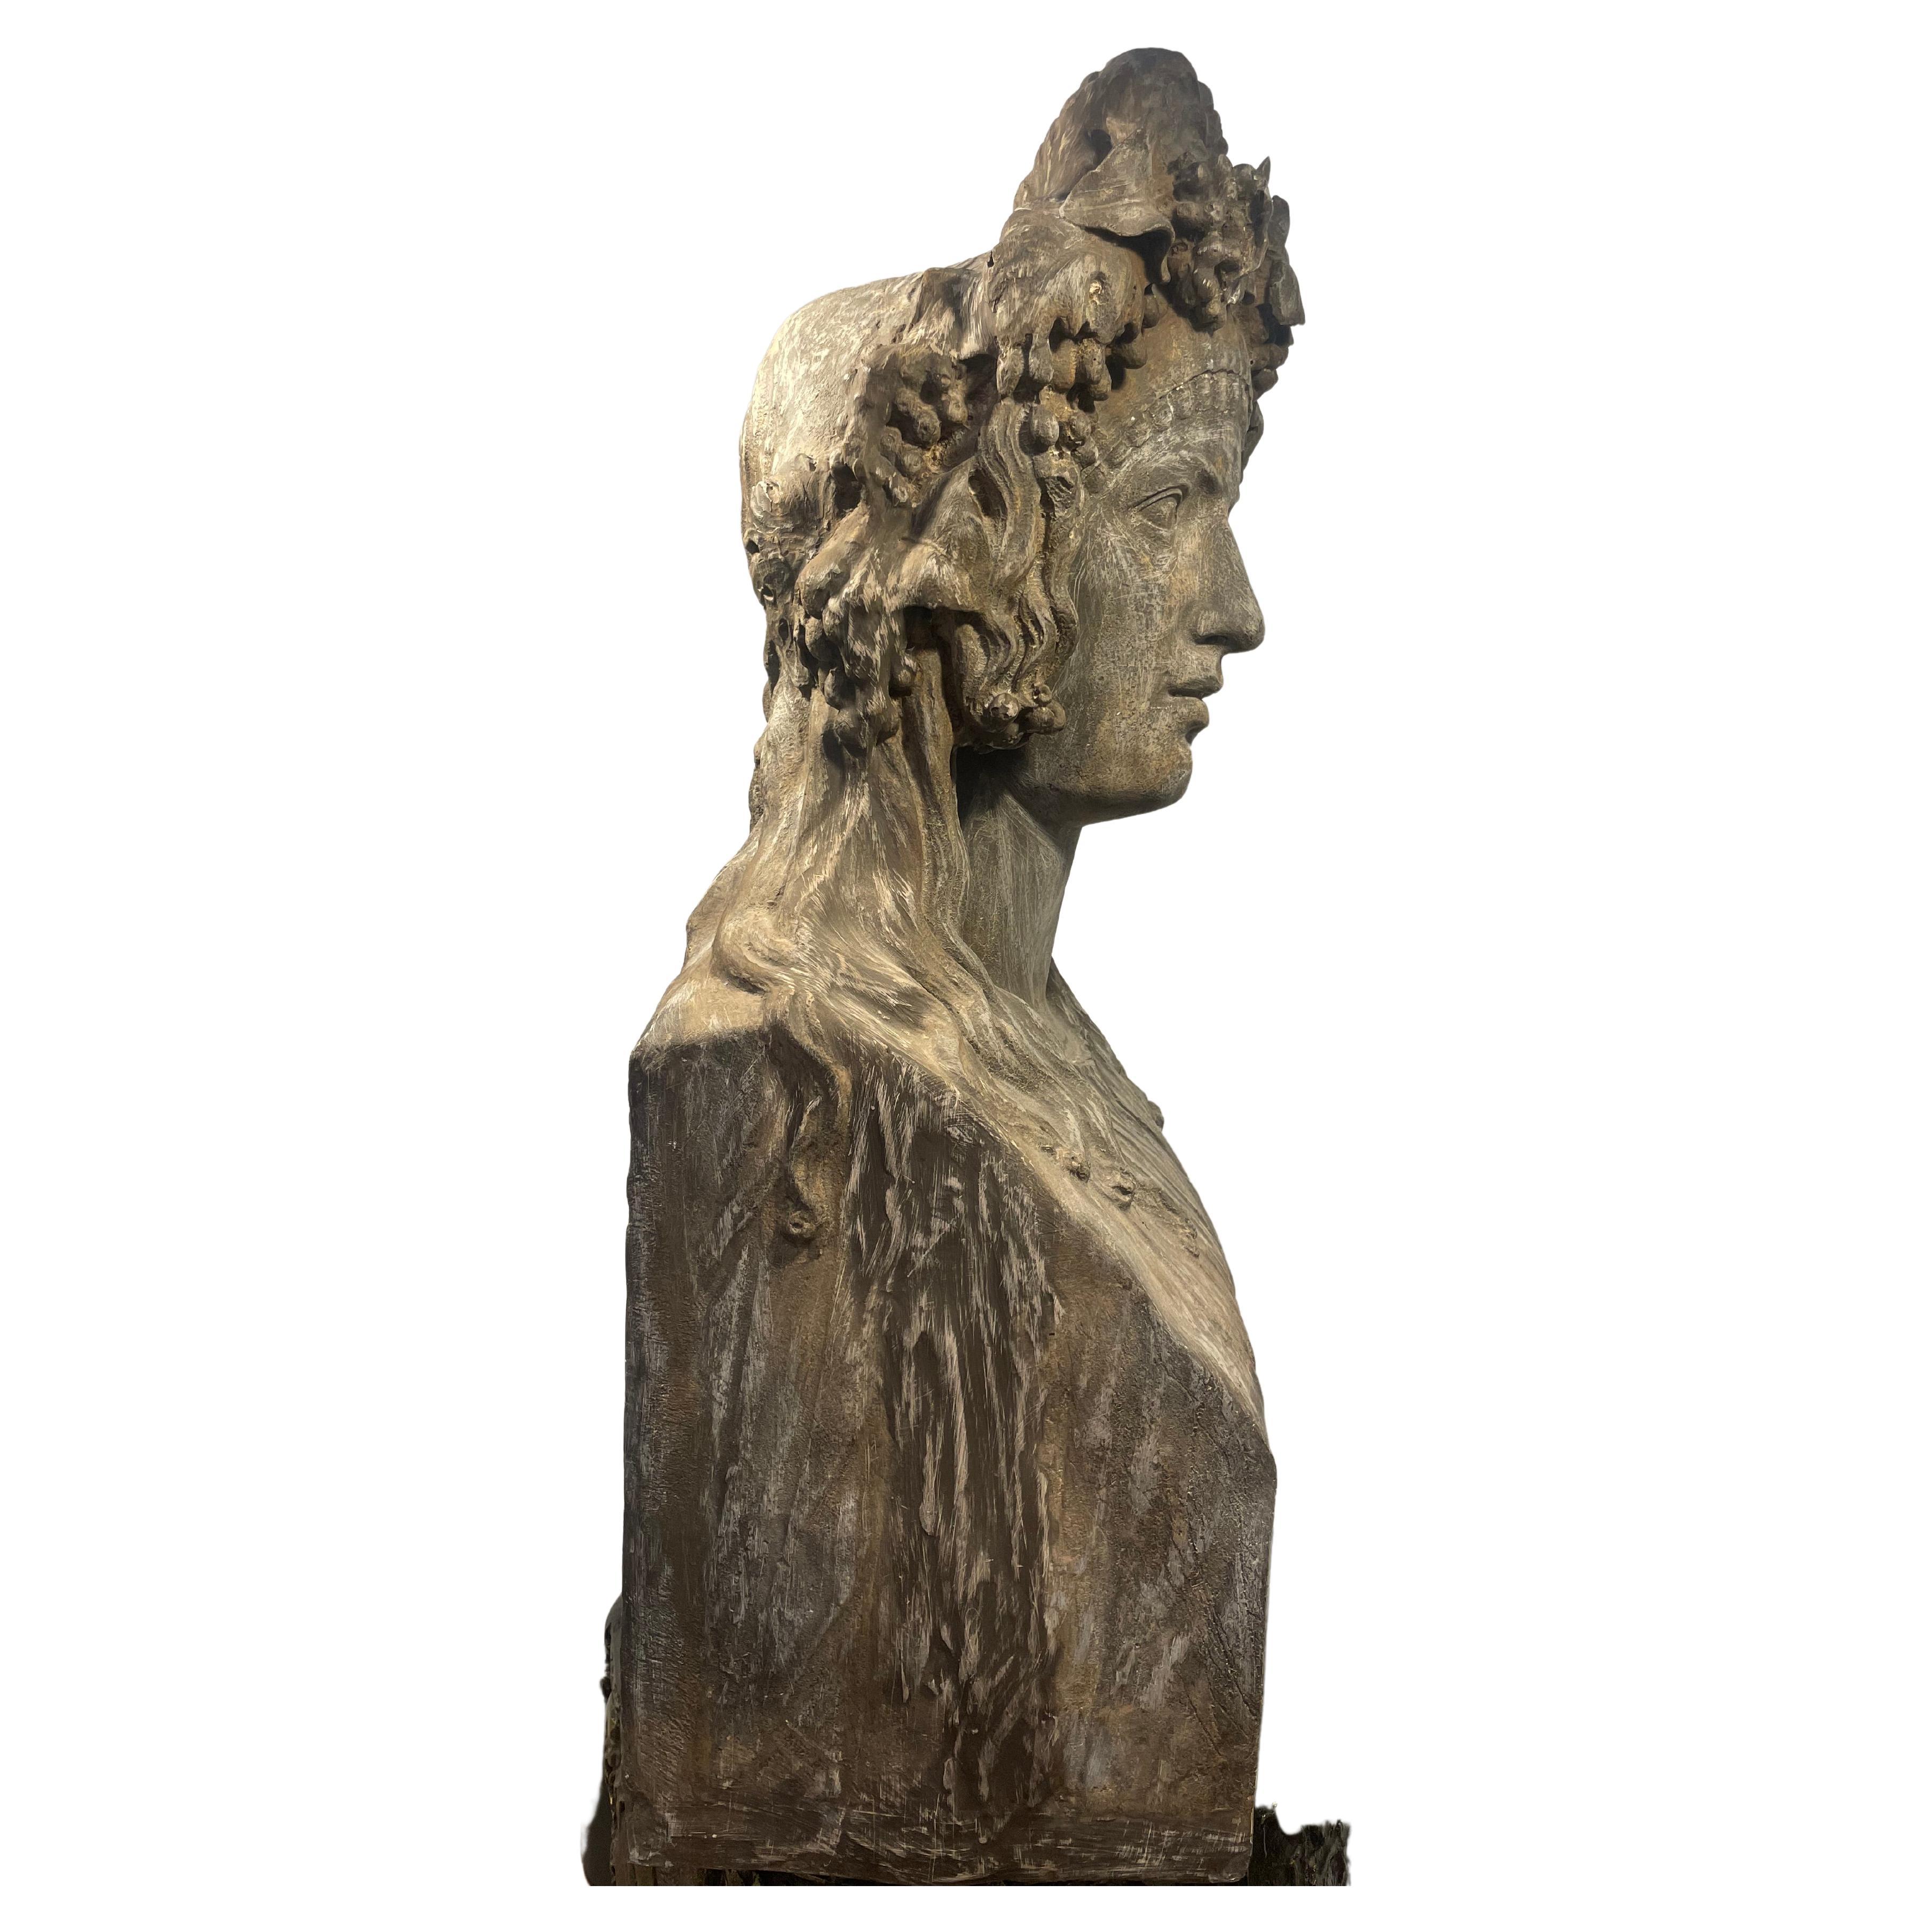 Roman Herm/Goddess Composition Bust 
Sourced from France by Martyn Lawrence Bullard
Herm, in Greek religion, is a sacred bust depicting deities of Hermes, the fertility god.
In Ancient Greece, these statues were used to symbolize protection,